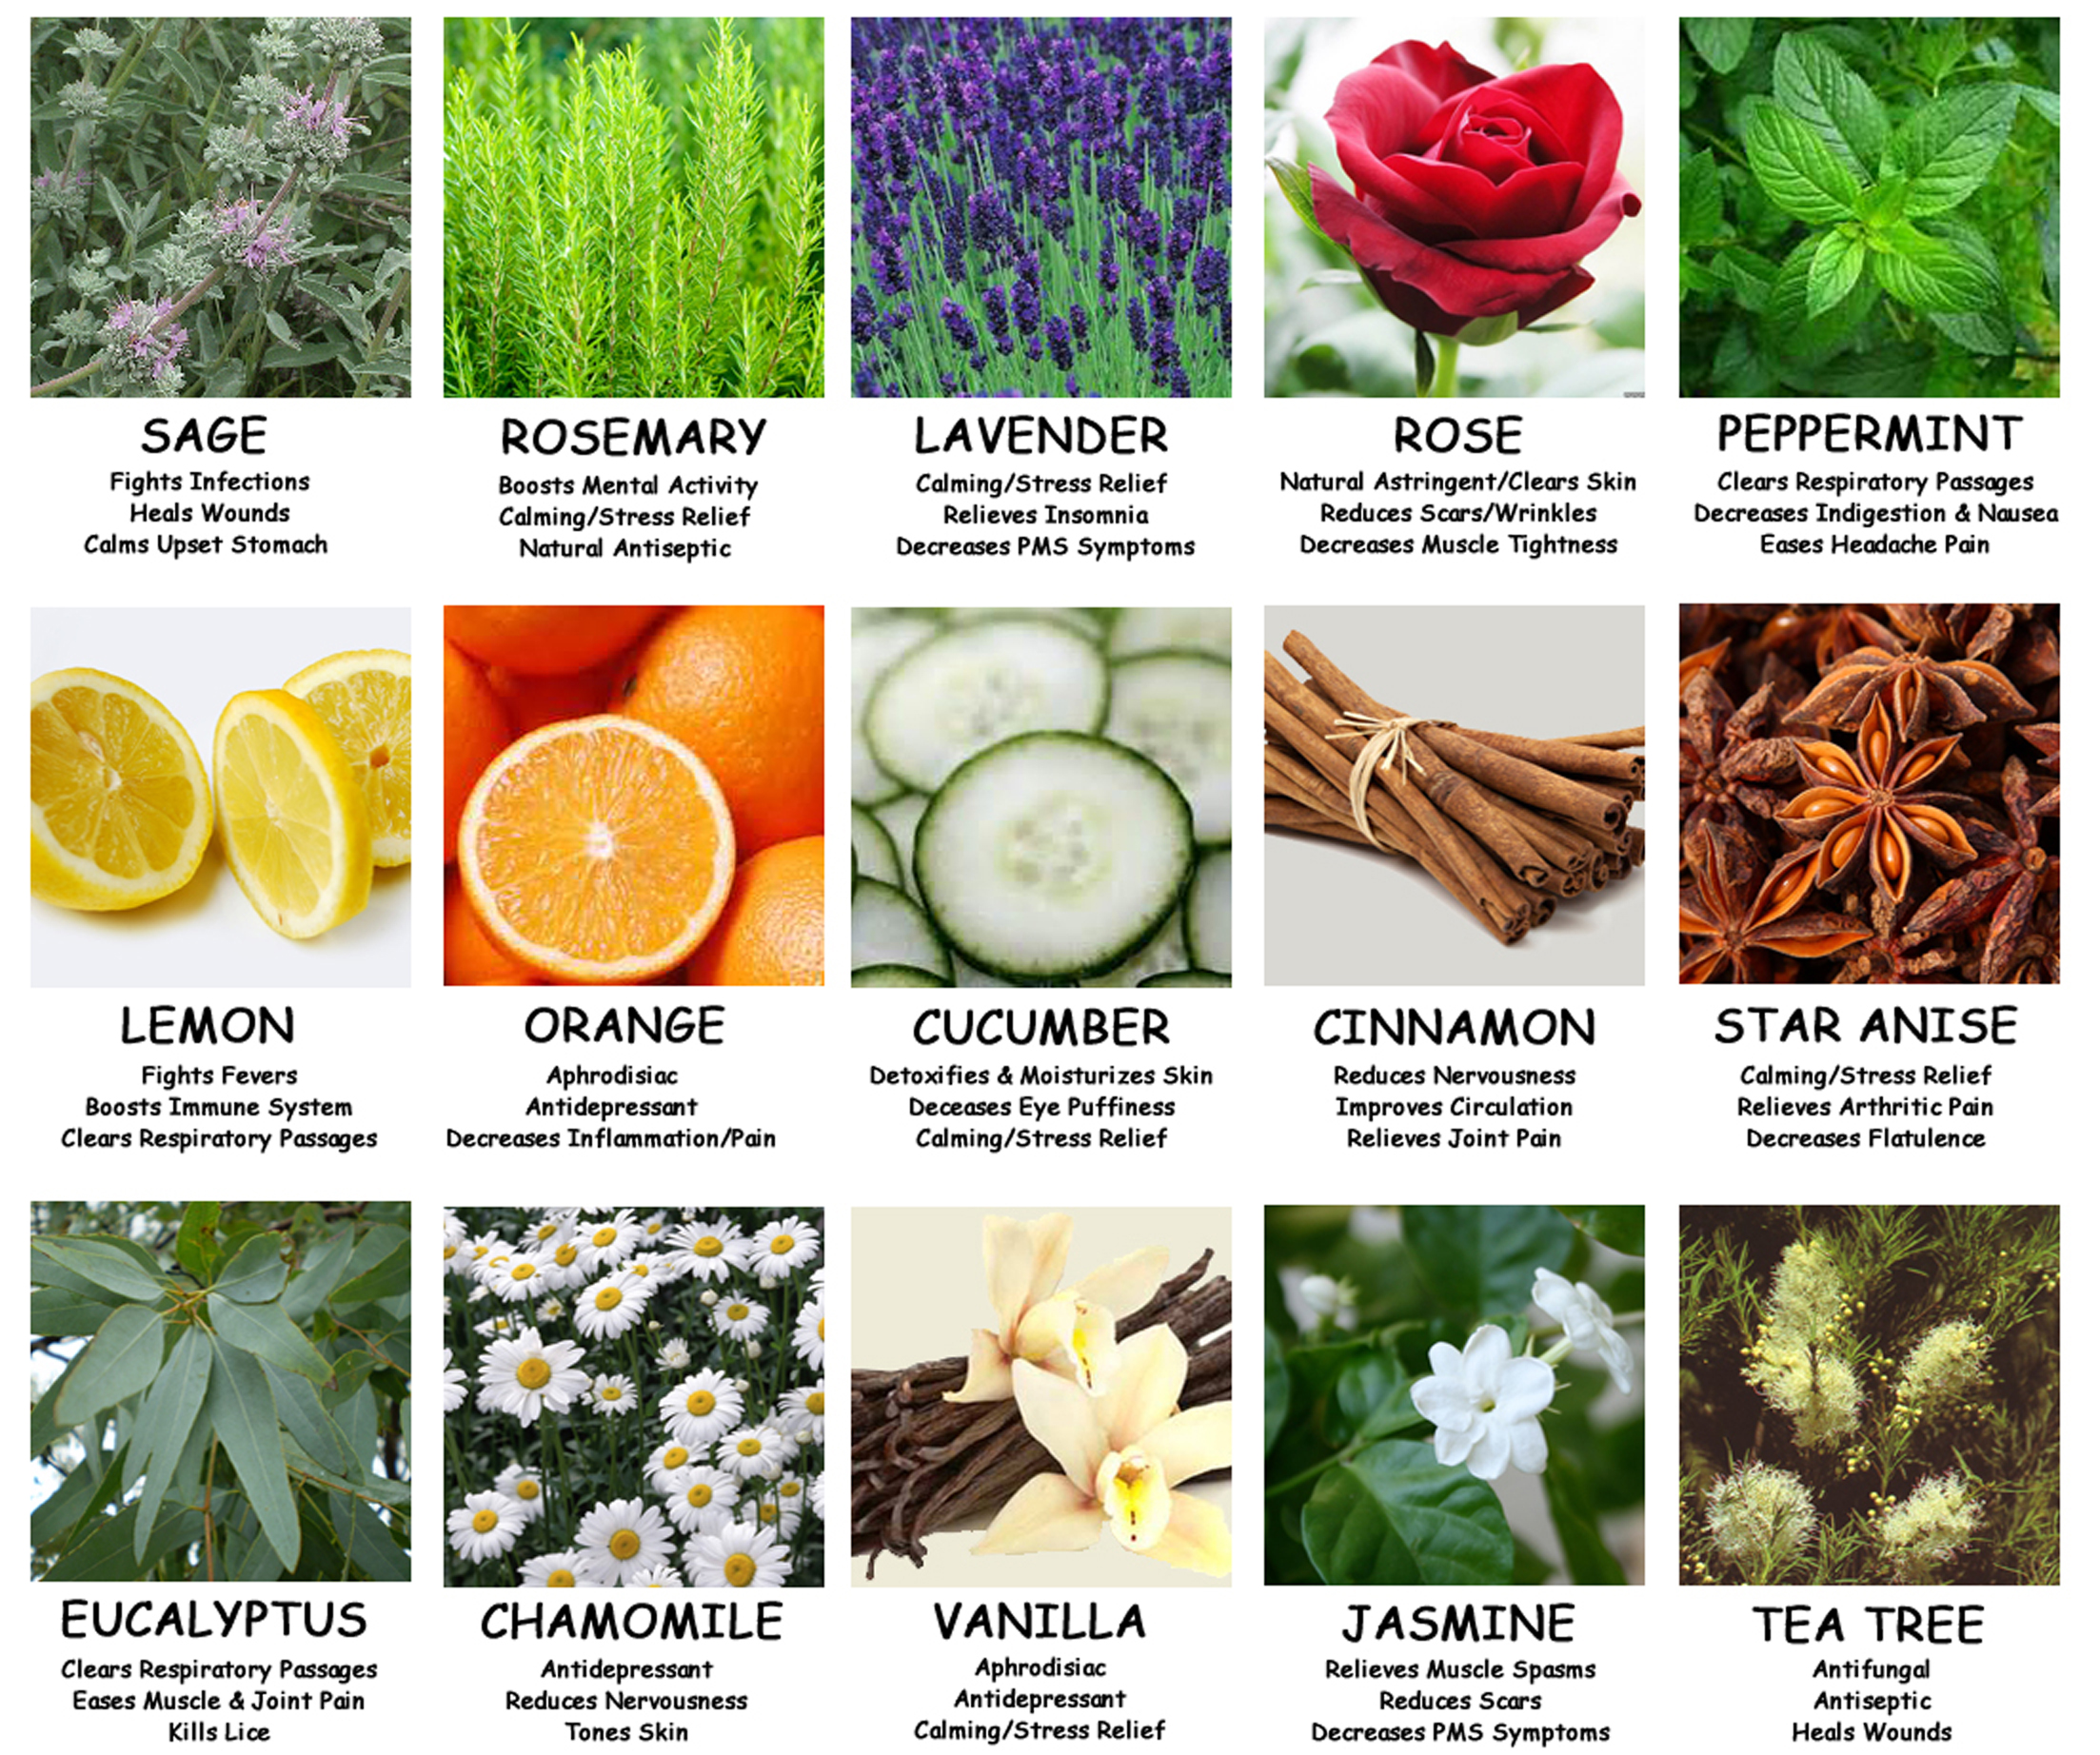 What are some good aromatherapy reference charts?